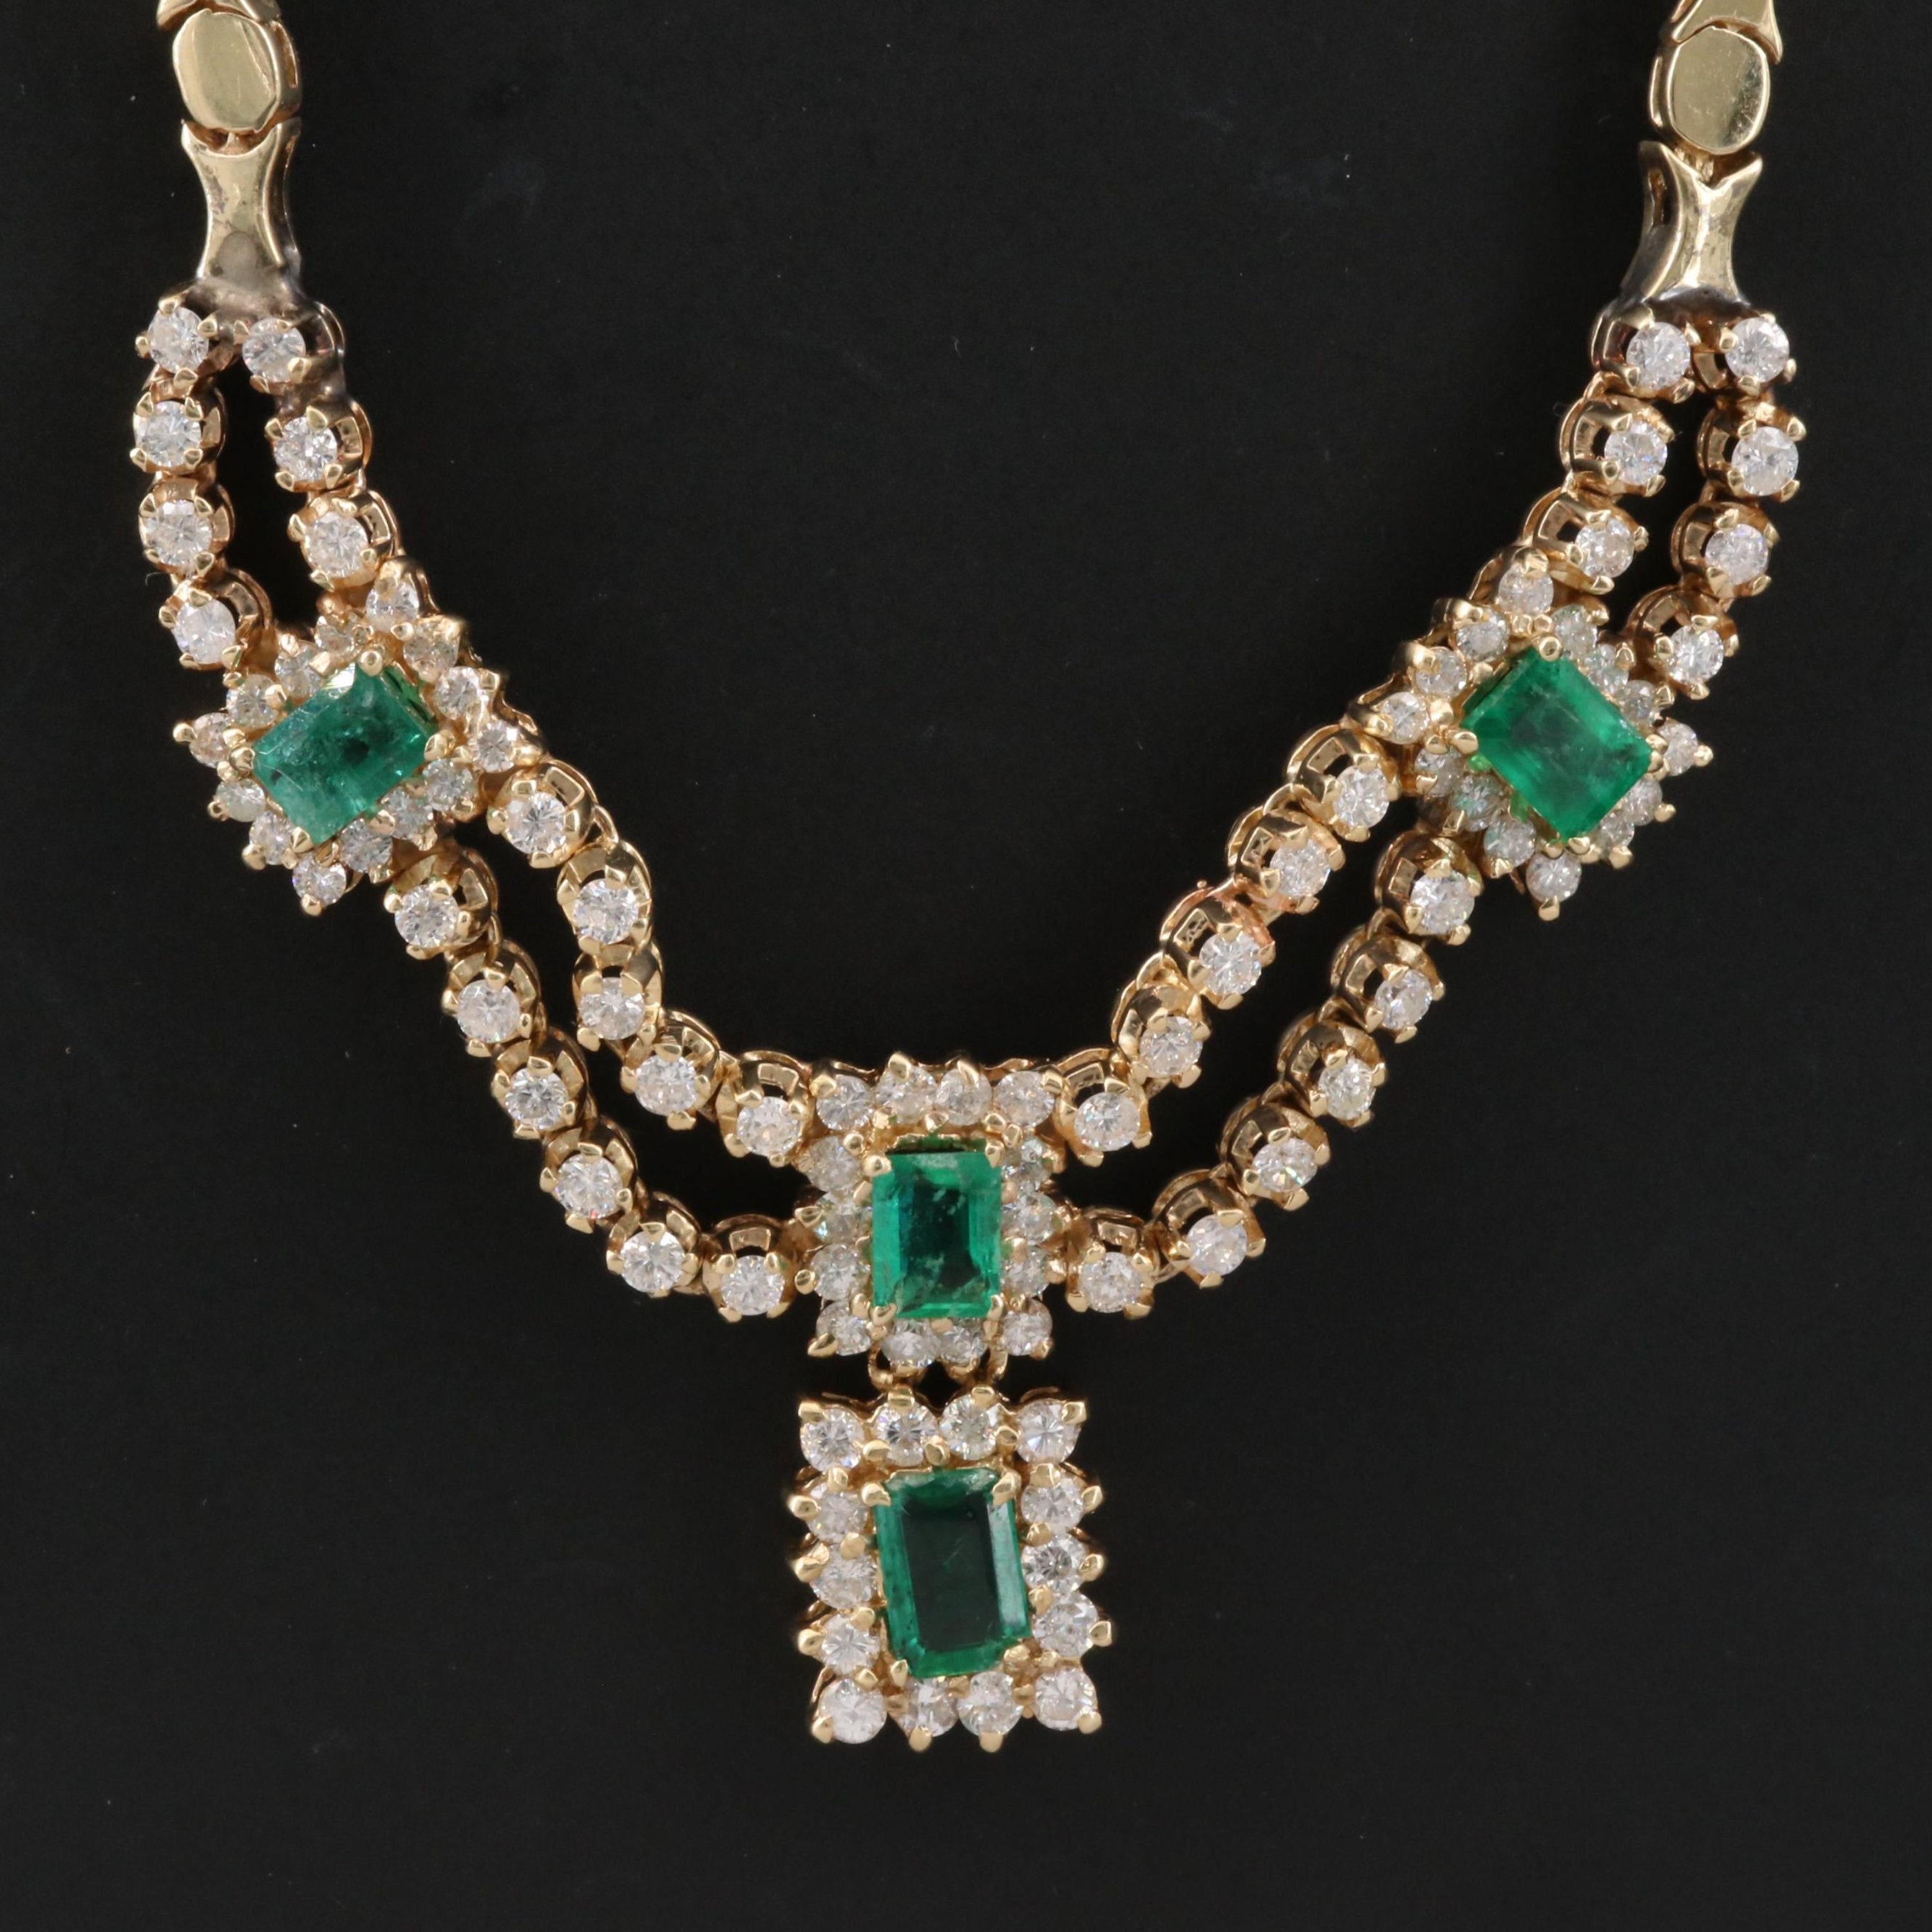 Vintage Emerald Cut Emerald Diamonds Pendant Necklace, 18K Gold Natural Emerald Diamond Pendant Necklace, - Diamond Necklace
 
 Item Description
 → Handmade, Made to order
 → Material: SOLID 18K/18K GOLD
 
 Stone Details :
 
 Primary Stone(s) Type: